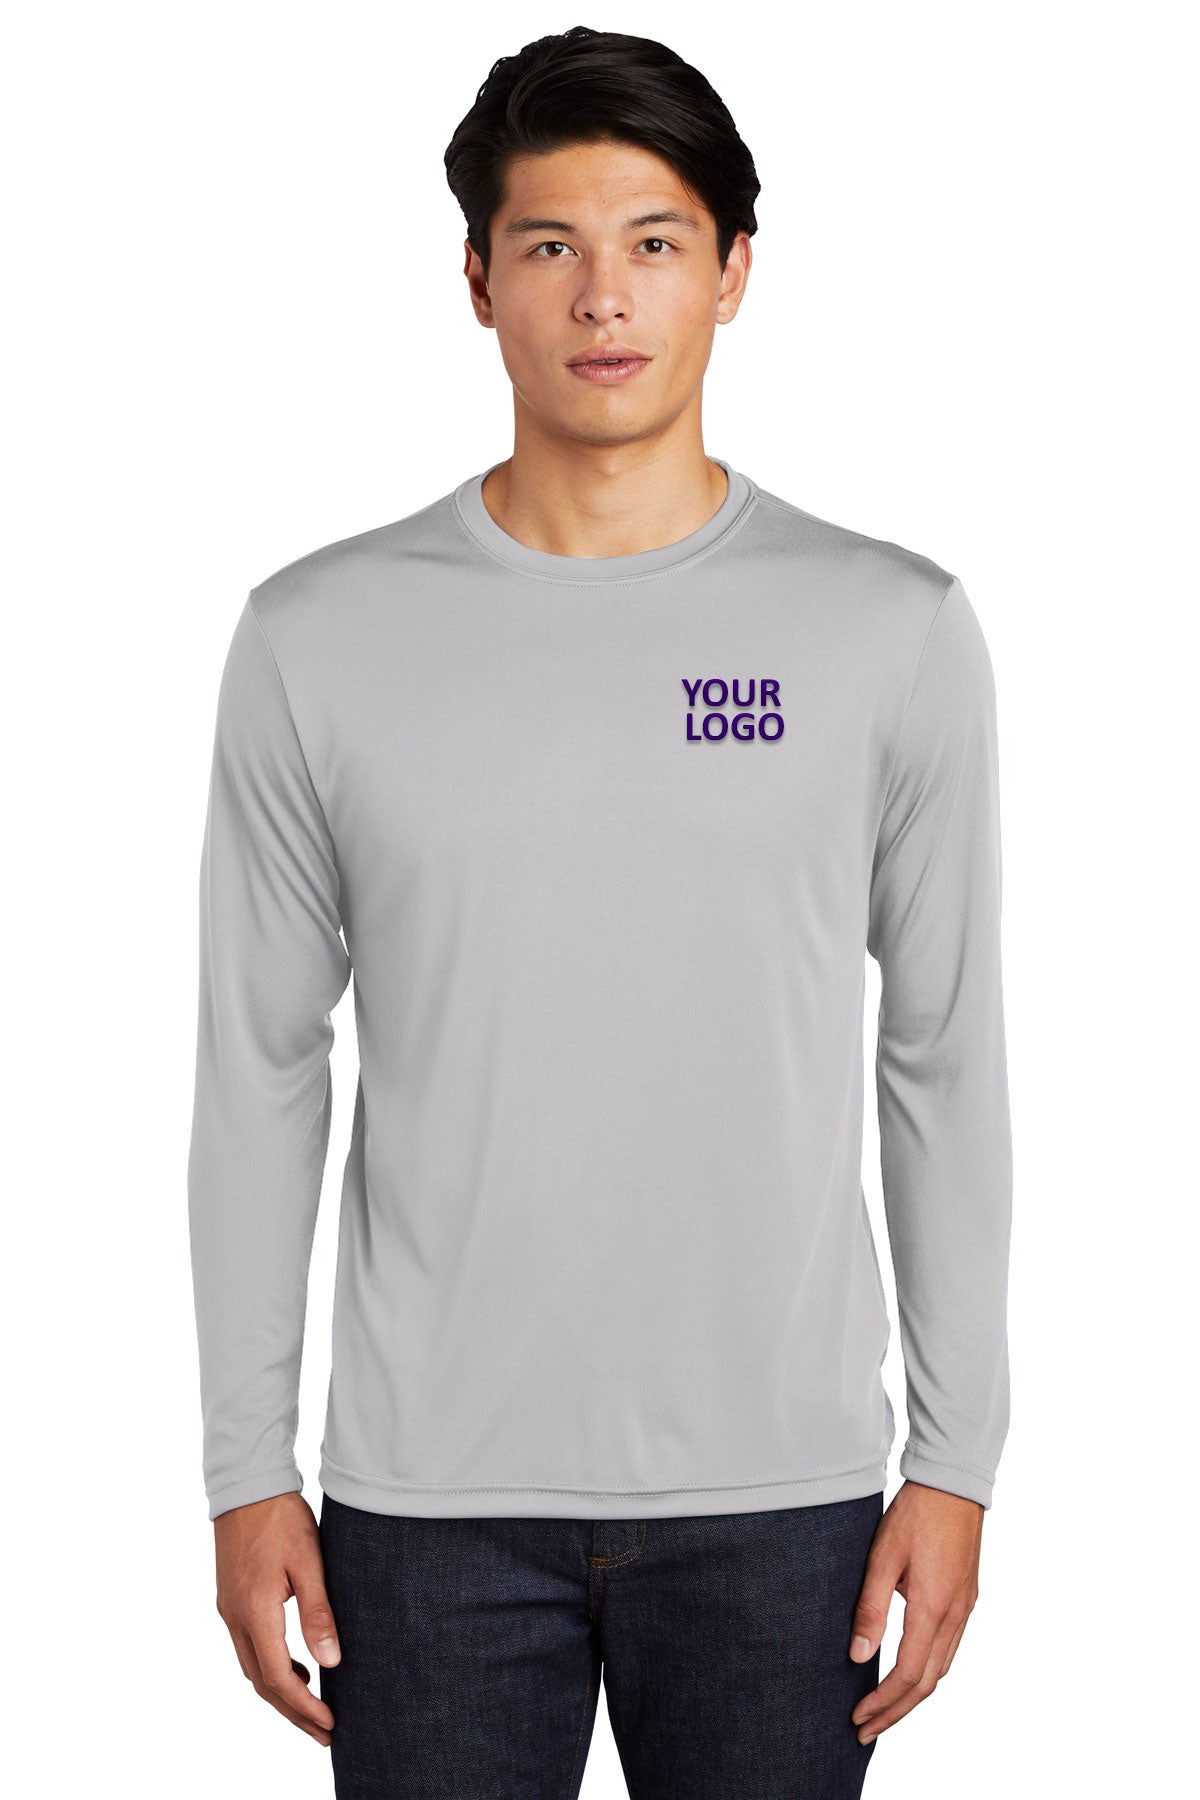 Sport-Tek Long Sleeve PosiCharge Customized Competitor Tee's, Silver